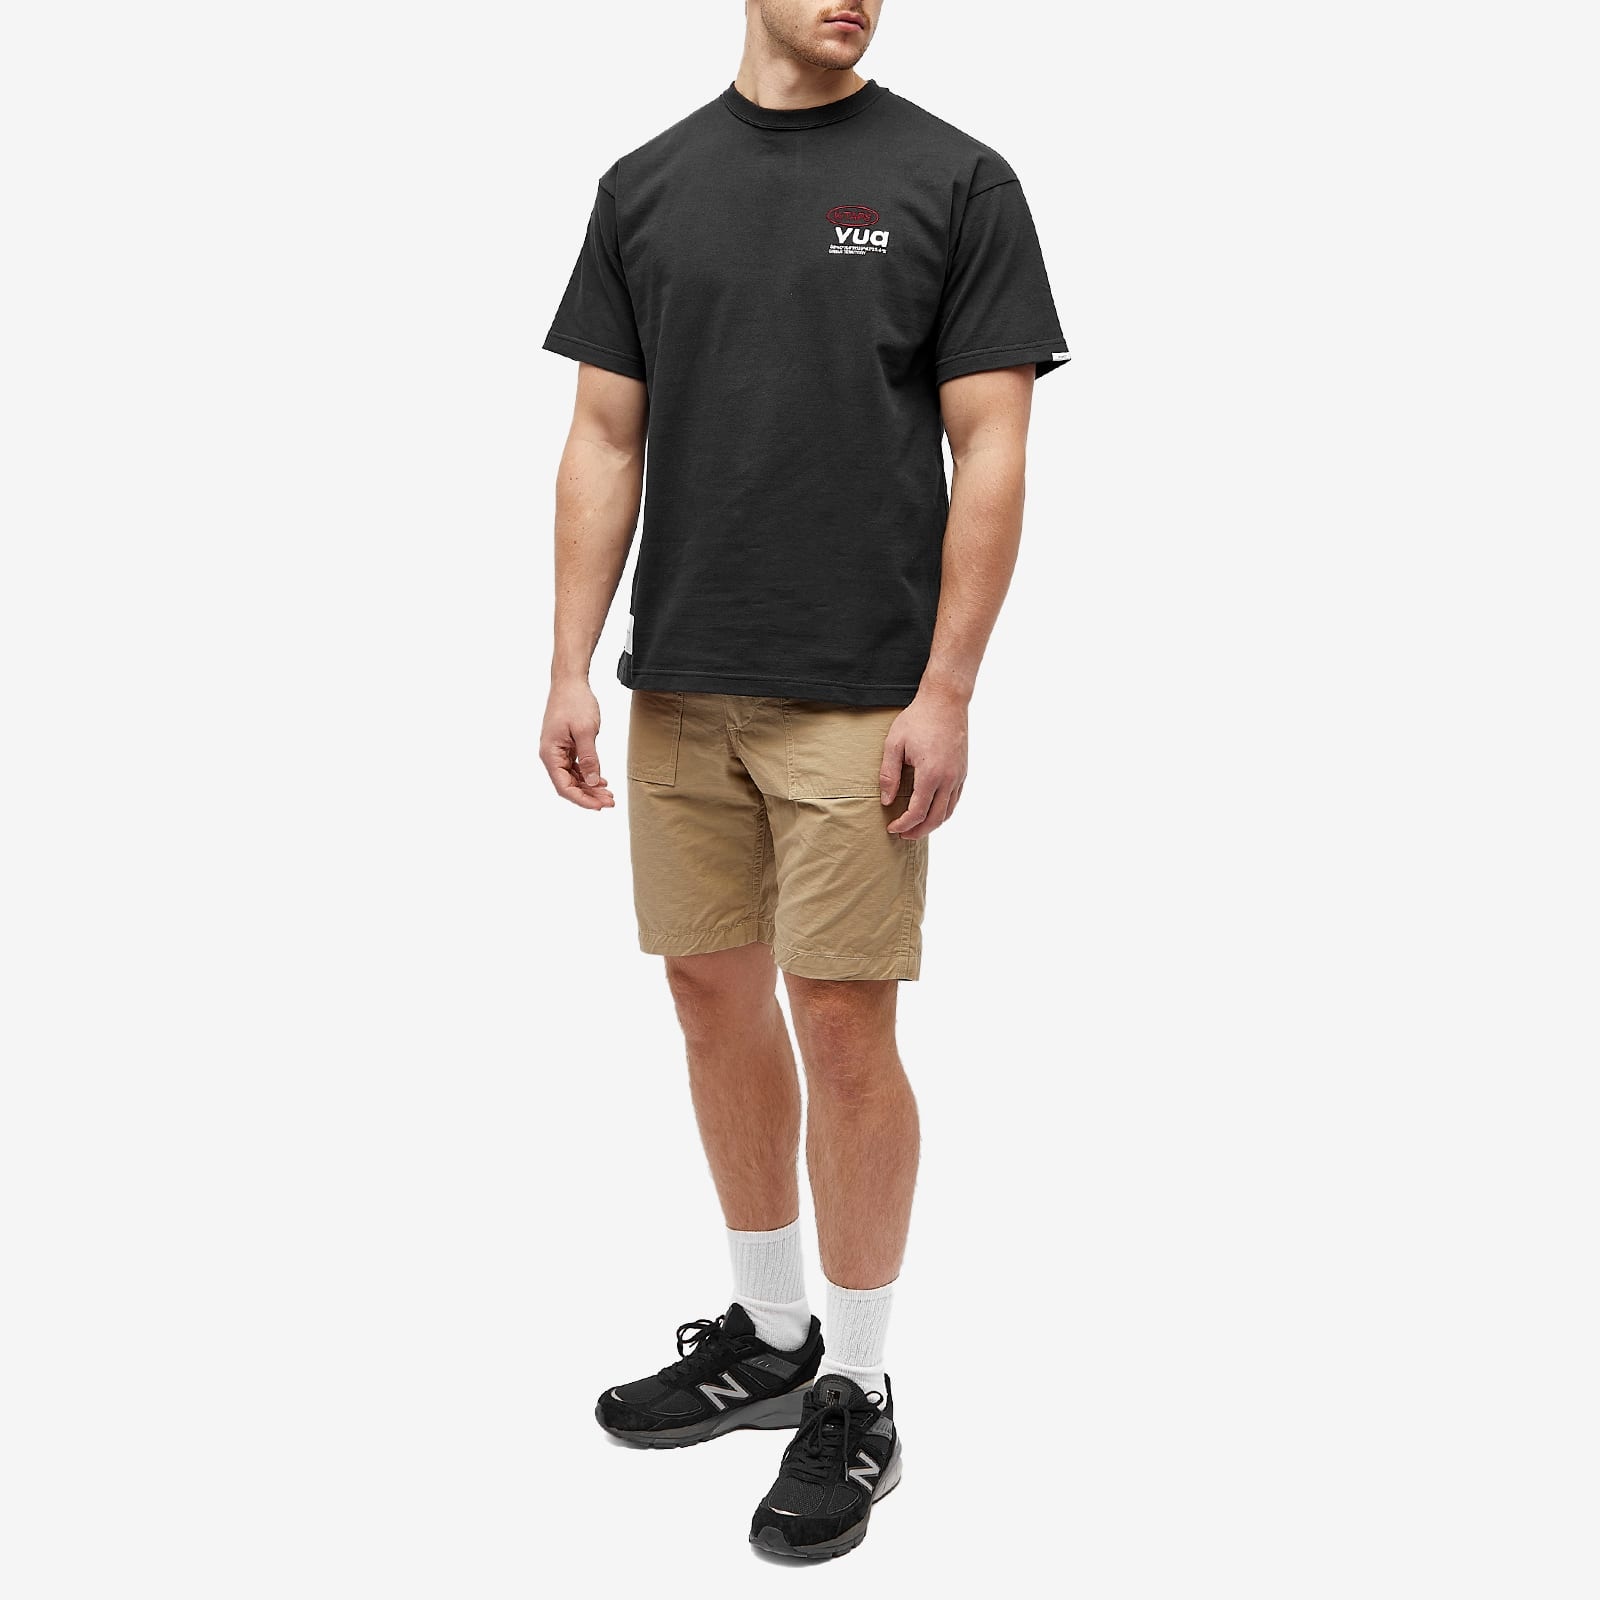 WTAPS 04 Embroided Crew Neck T-Shirt - 4